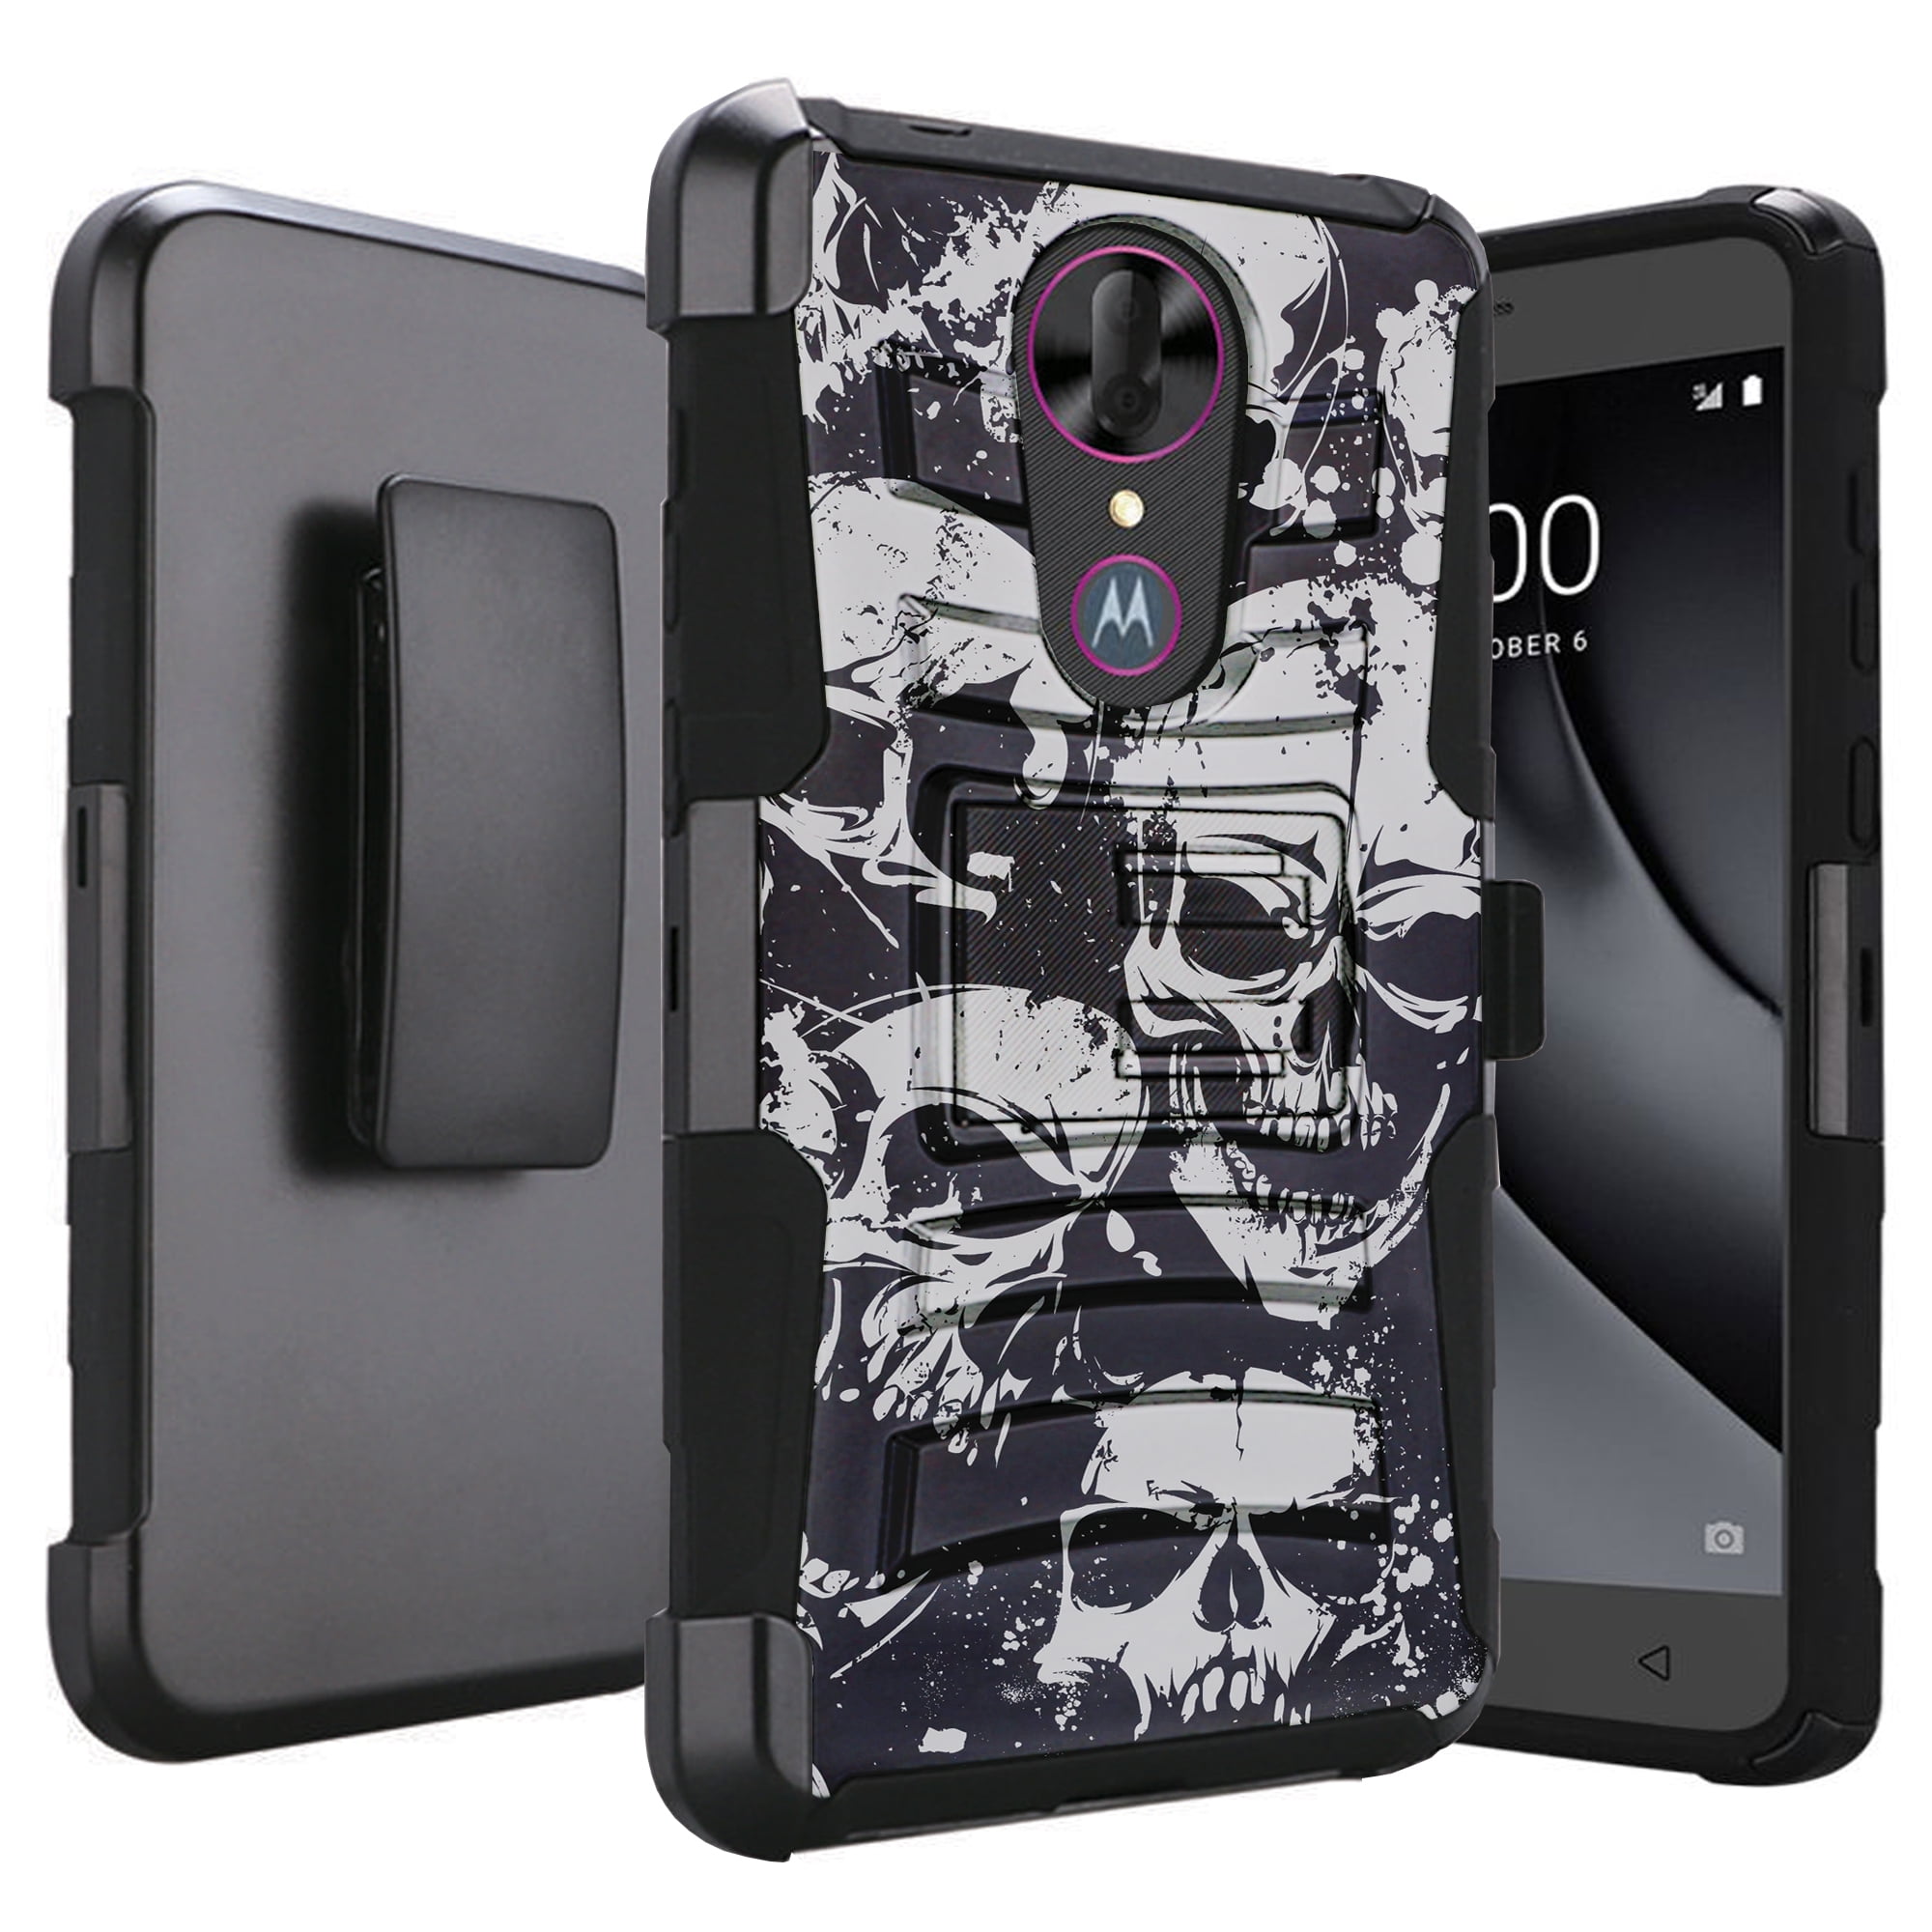 DALUX Hybrid Kickstand Holster Phone Case Compatible with